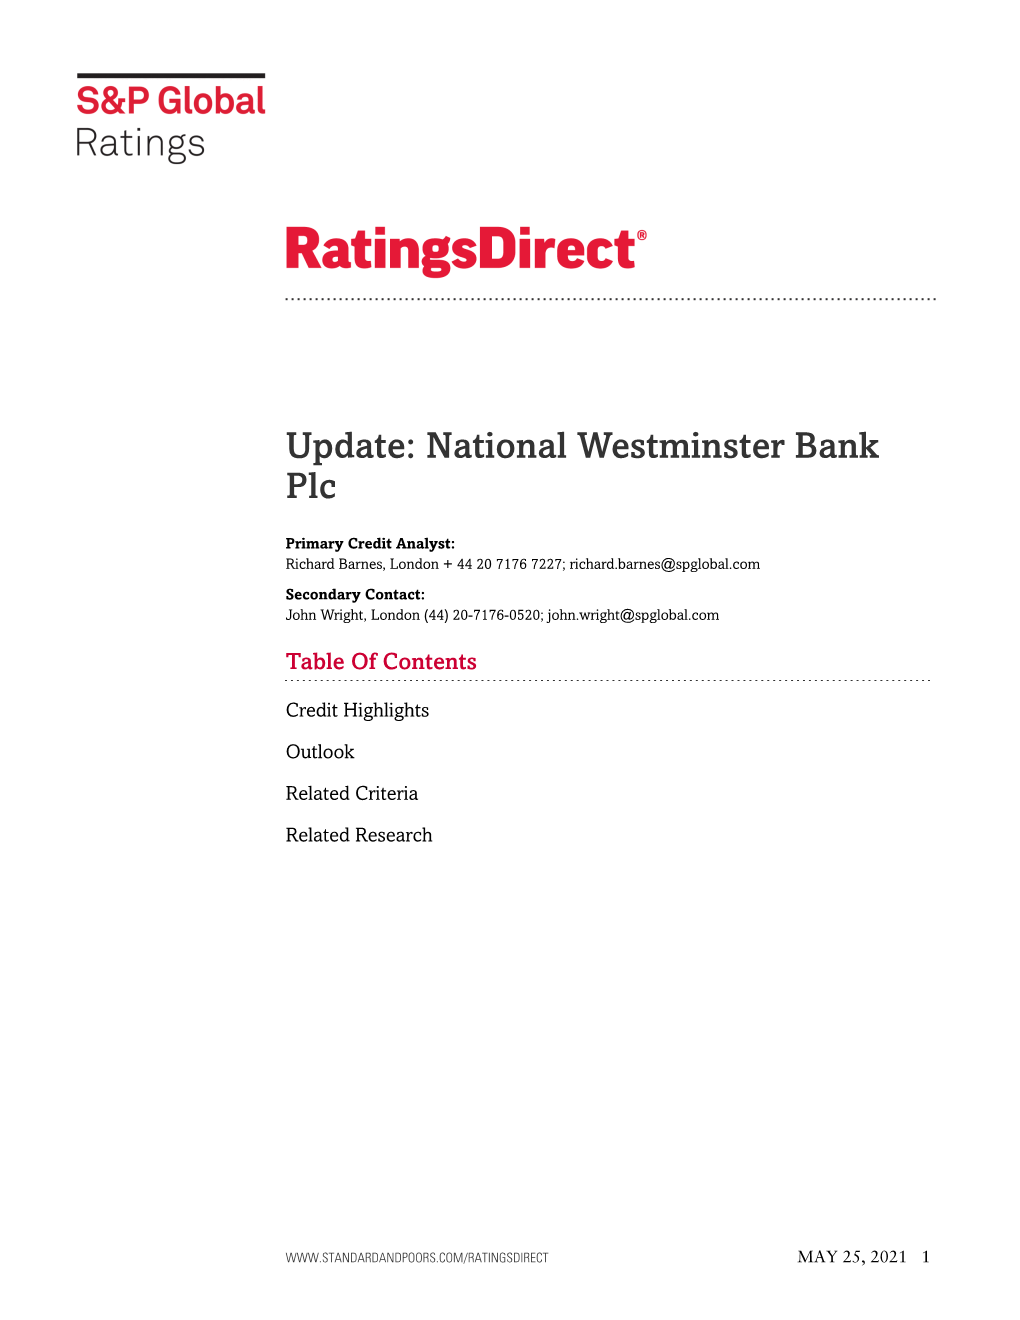 Update: National Westminster Bank Plc